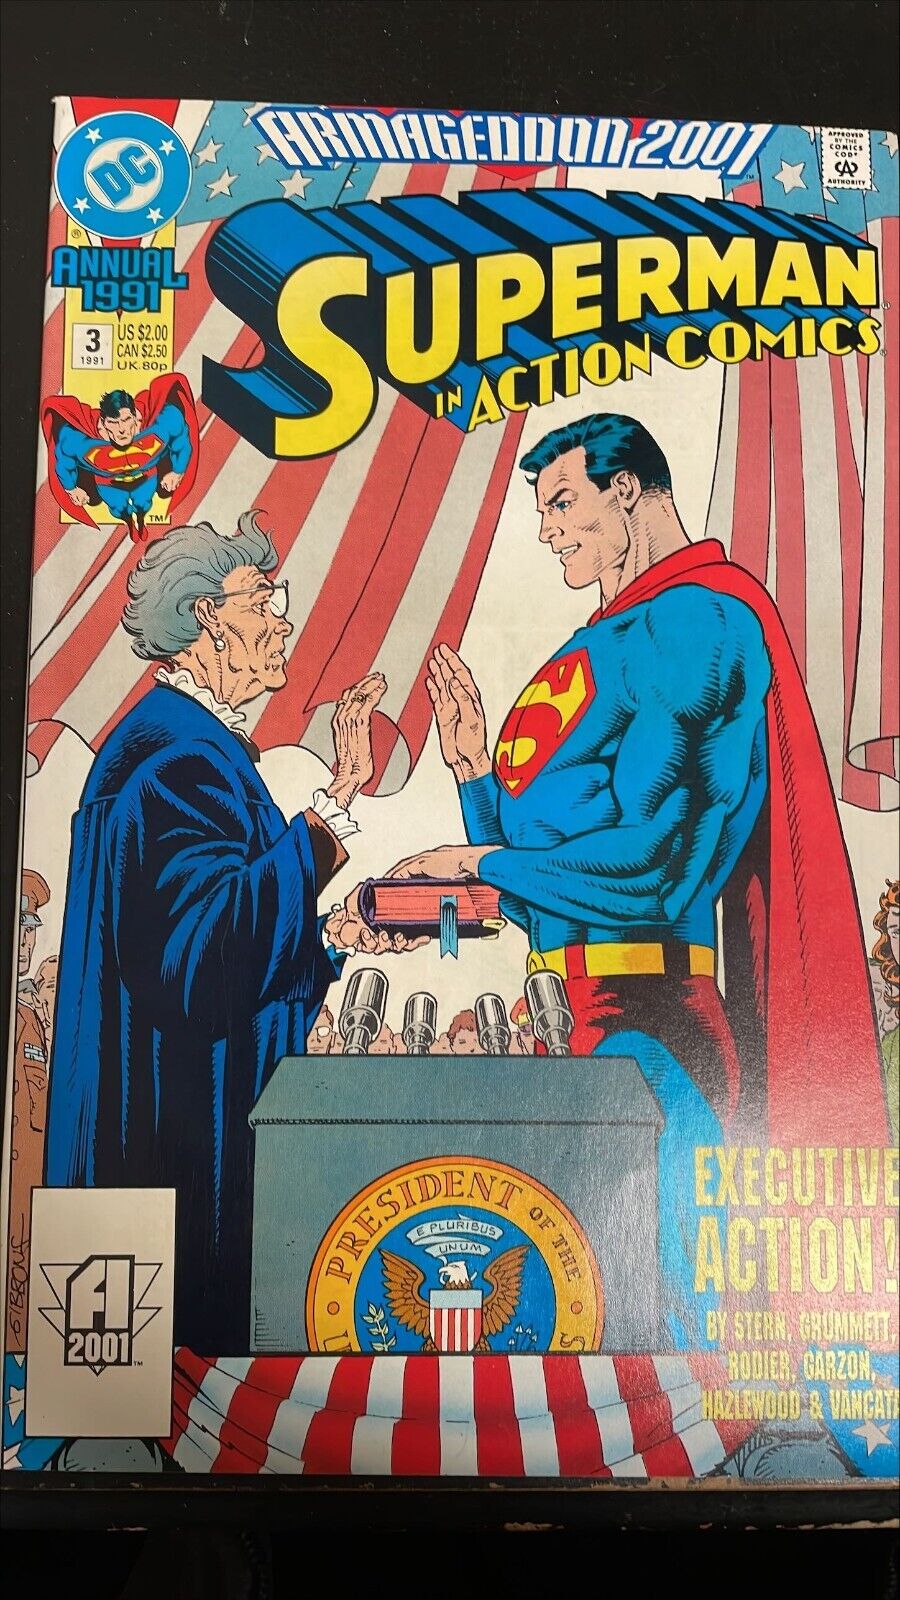 DC COMICS SUPERMAN IN ACTION COMICS #0 - 1041 MULTIPLE ISSUES/COVERS AVAILABLE